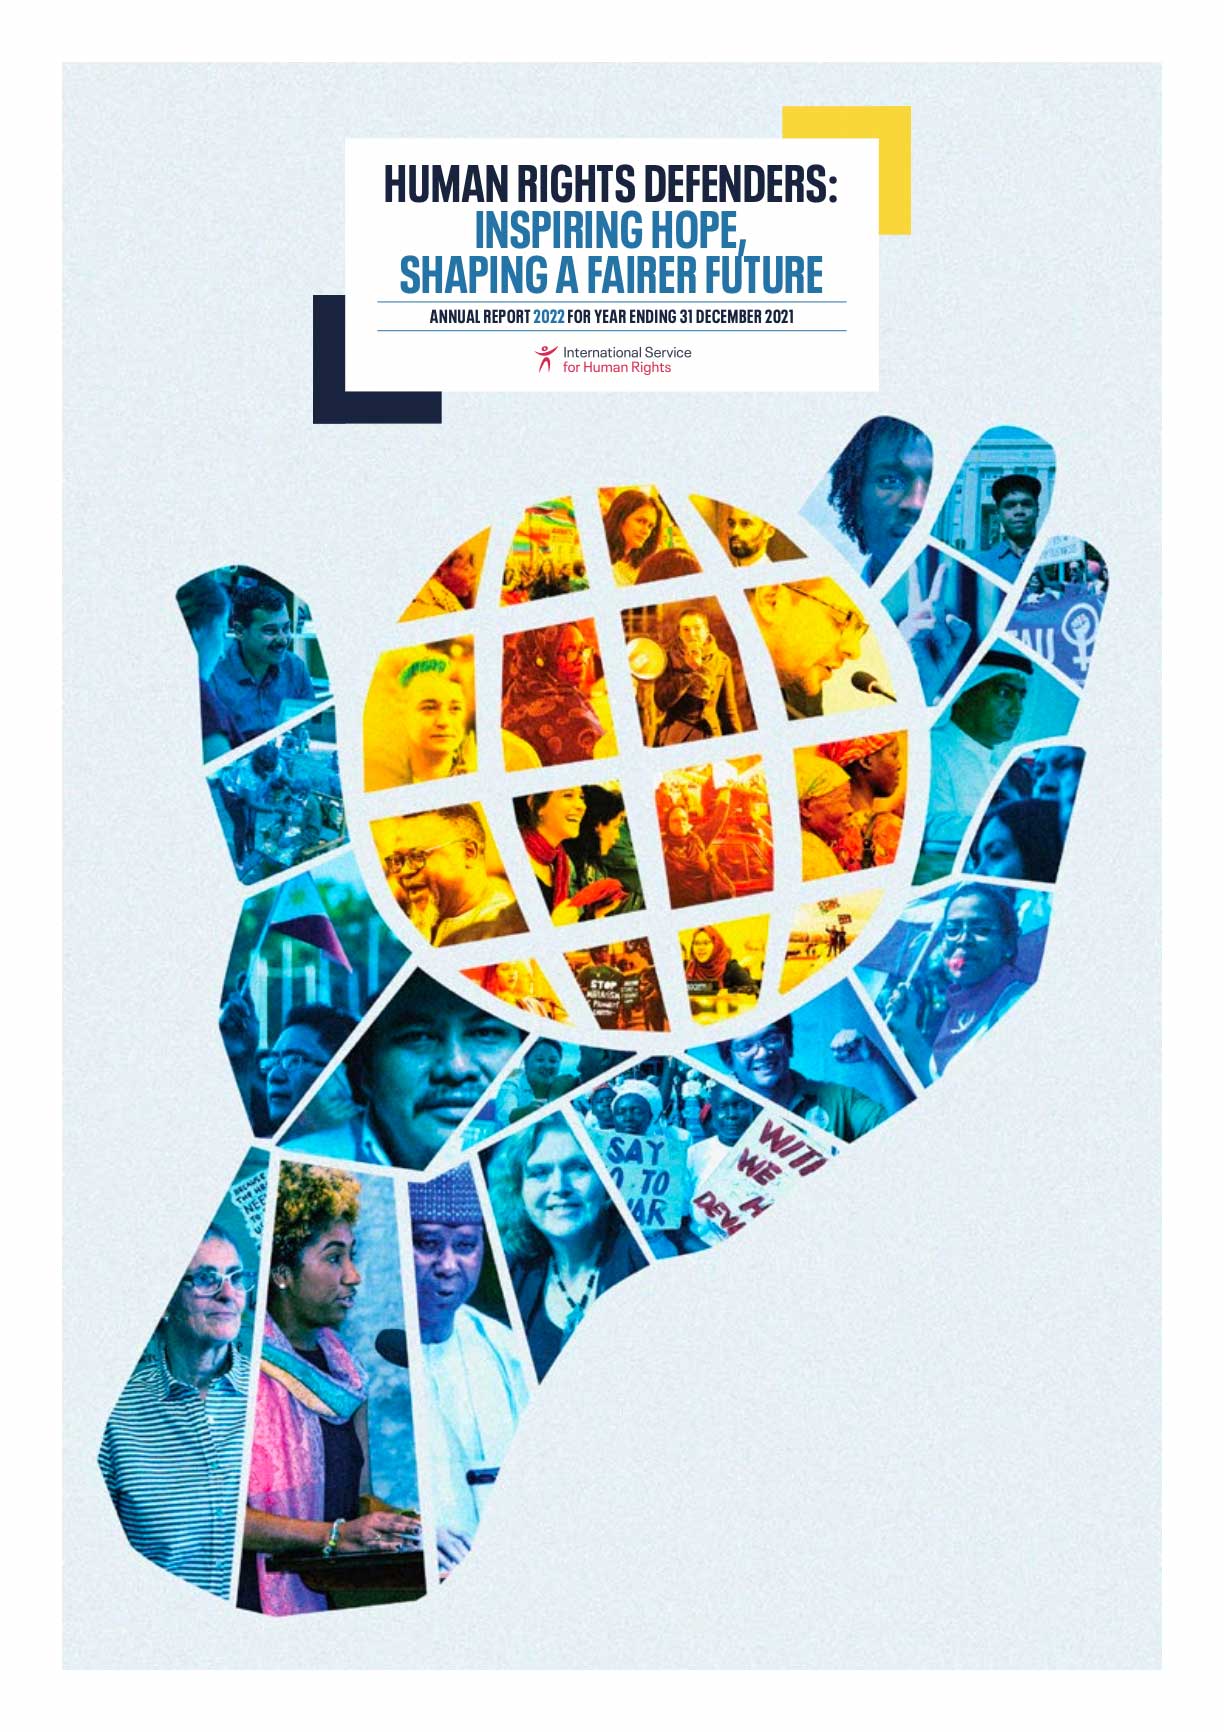 Annual report for the year 2021 on the condition of human rights defenders worldwide: "Human Rights Defenders - Inspiring Hope, Shaping a Fairer Future".
